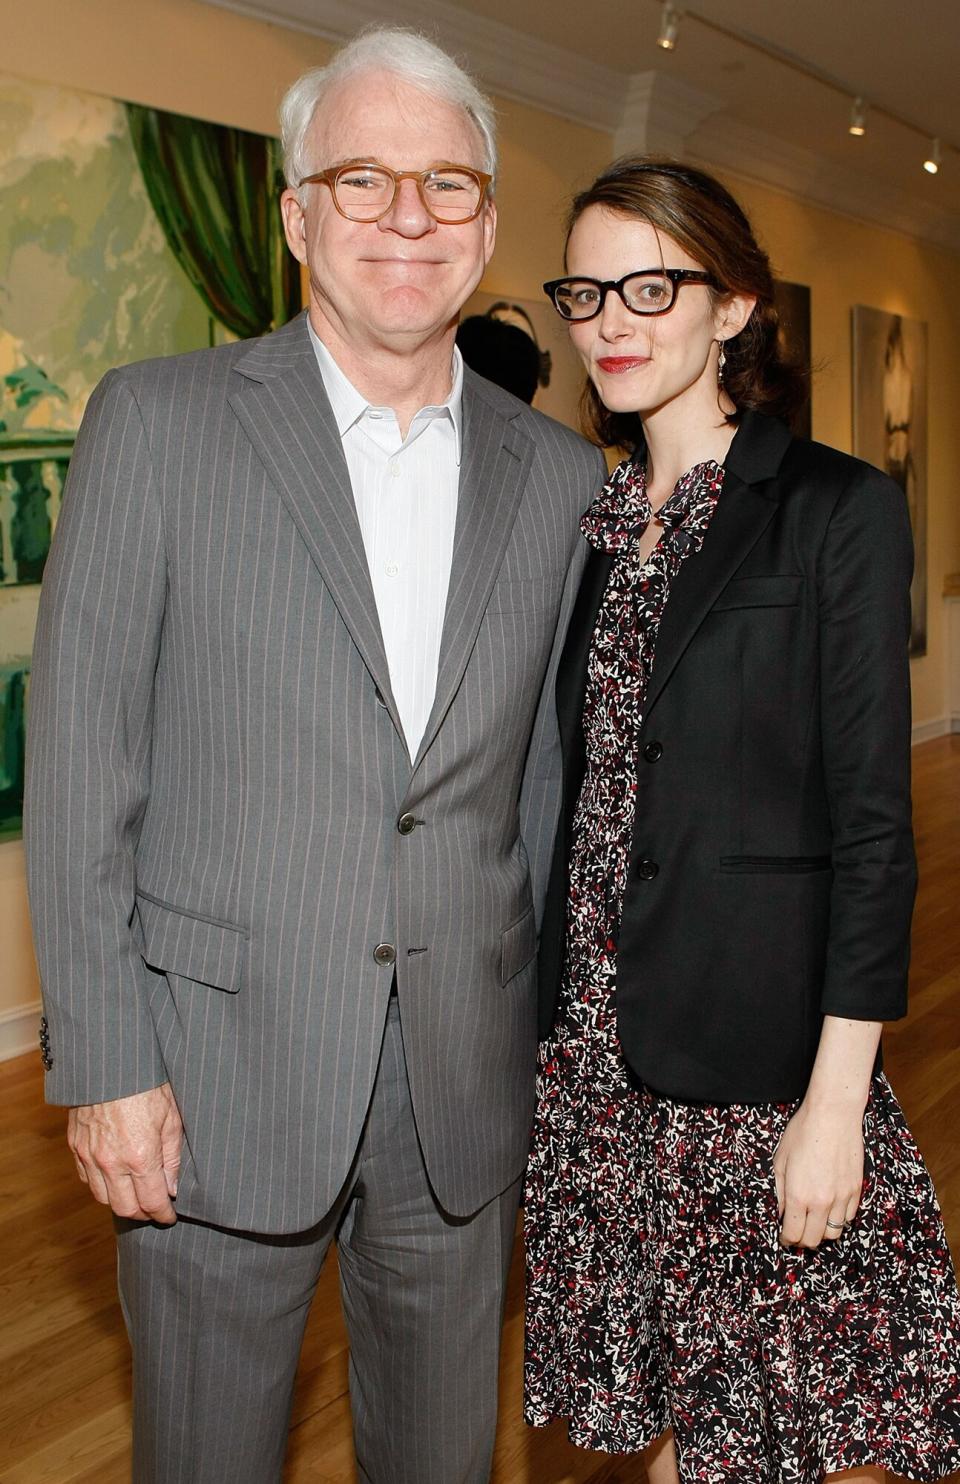 Steve Martin (L) and wife Anne Stringfield attend the presentation of "Wounded" curated by Carole Bayer Sager at LA Art House on May 6, 2009 in West Hollywood, California